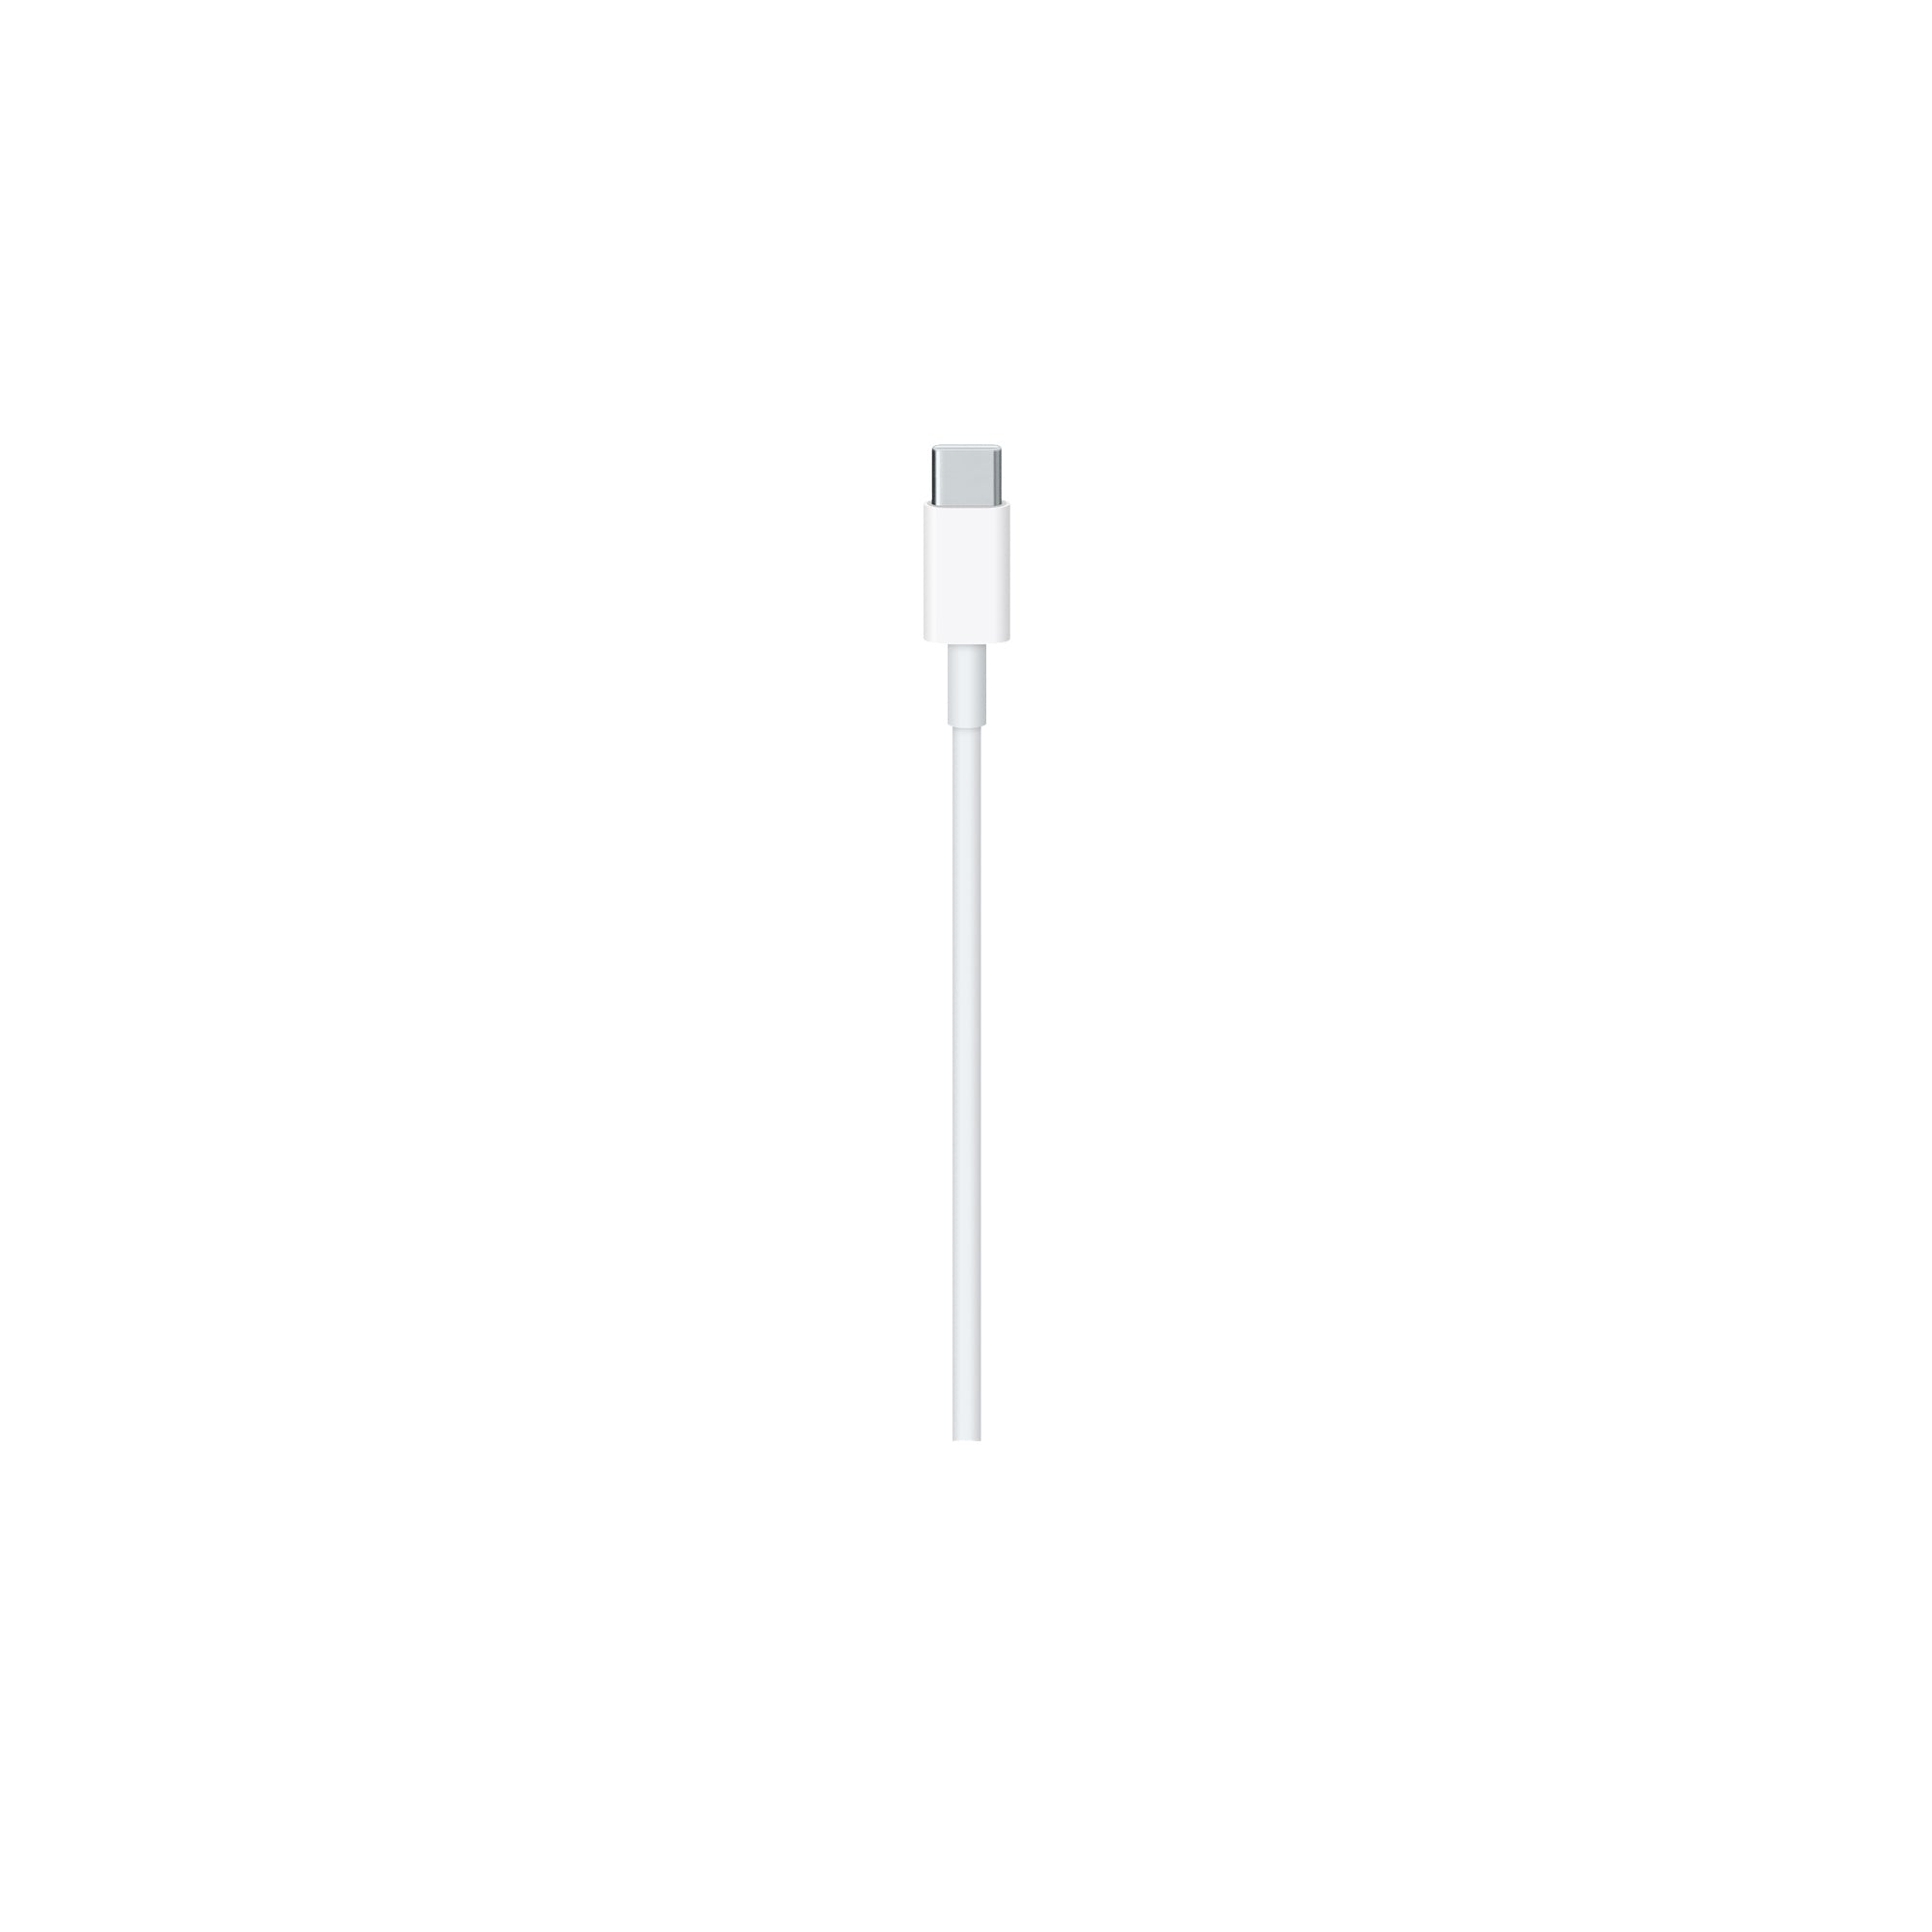 Apple USB-C to USB-C Cable (1 m)